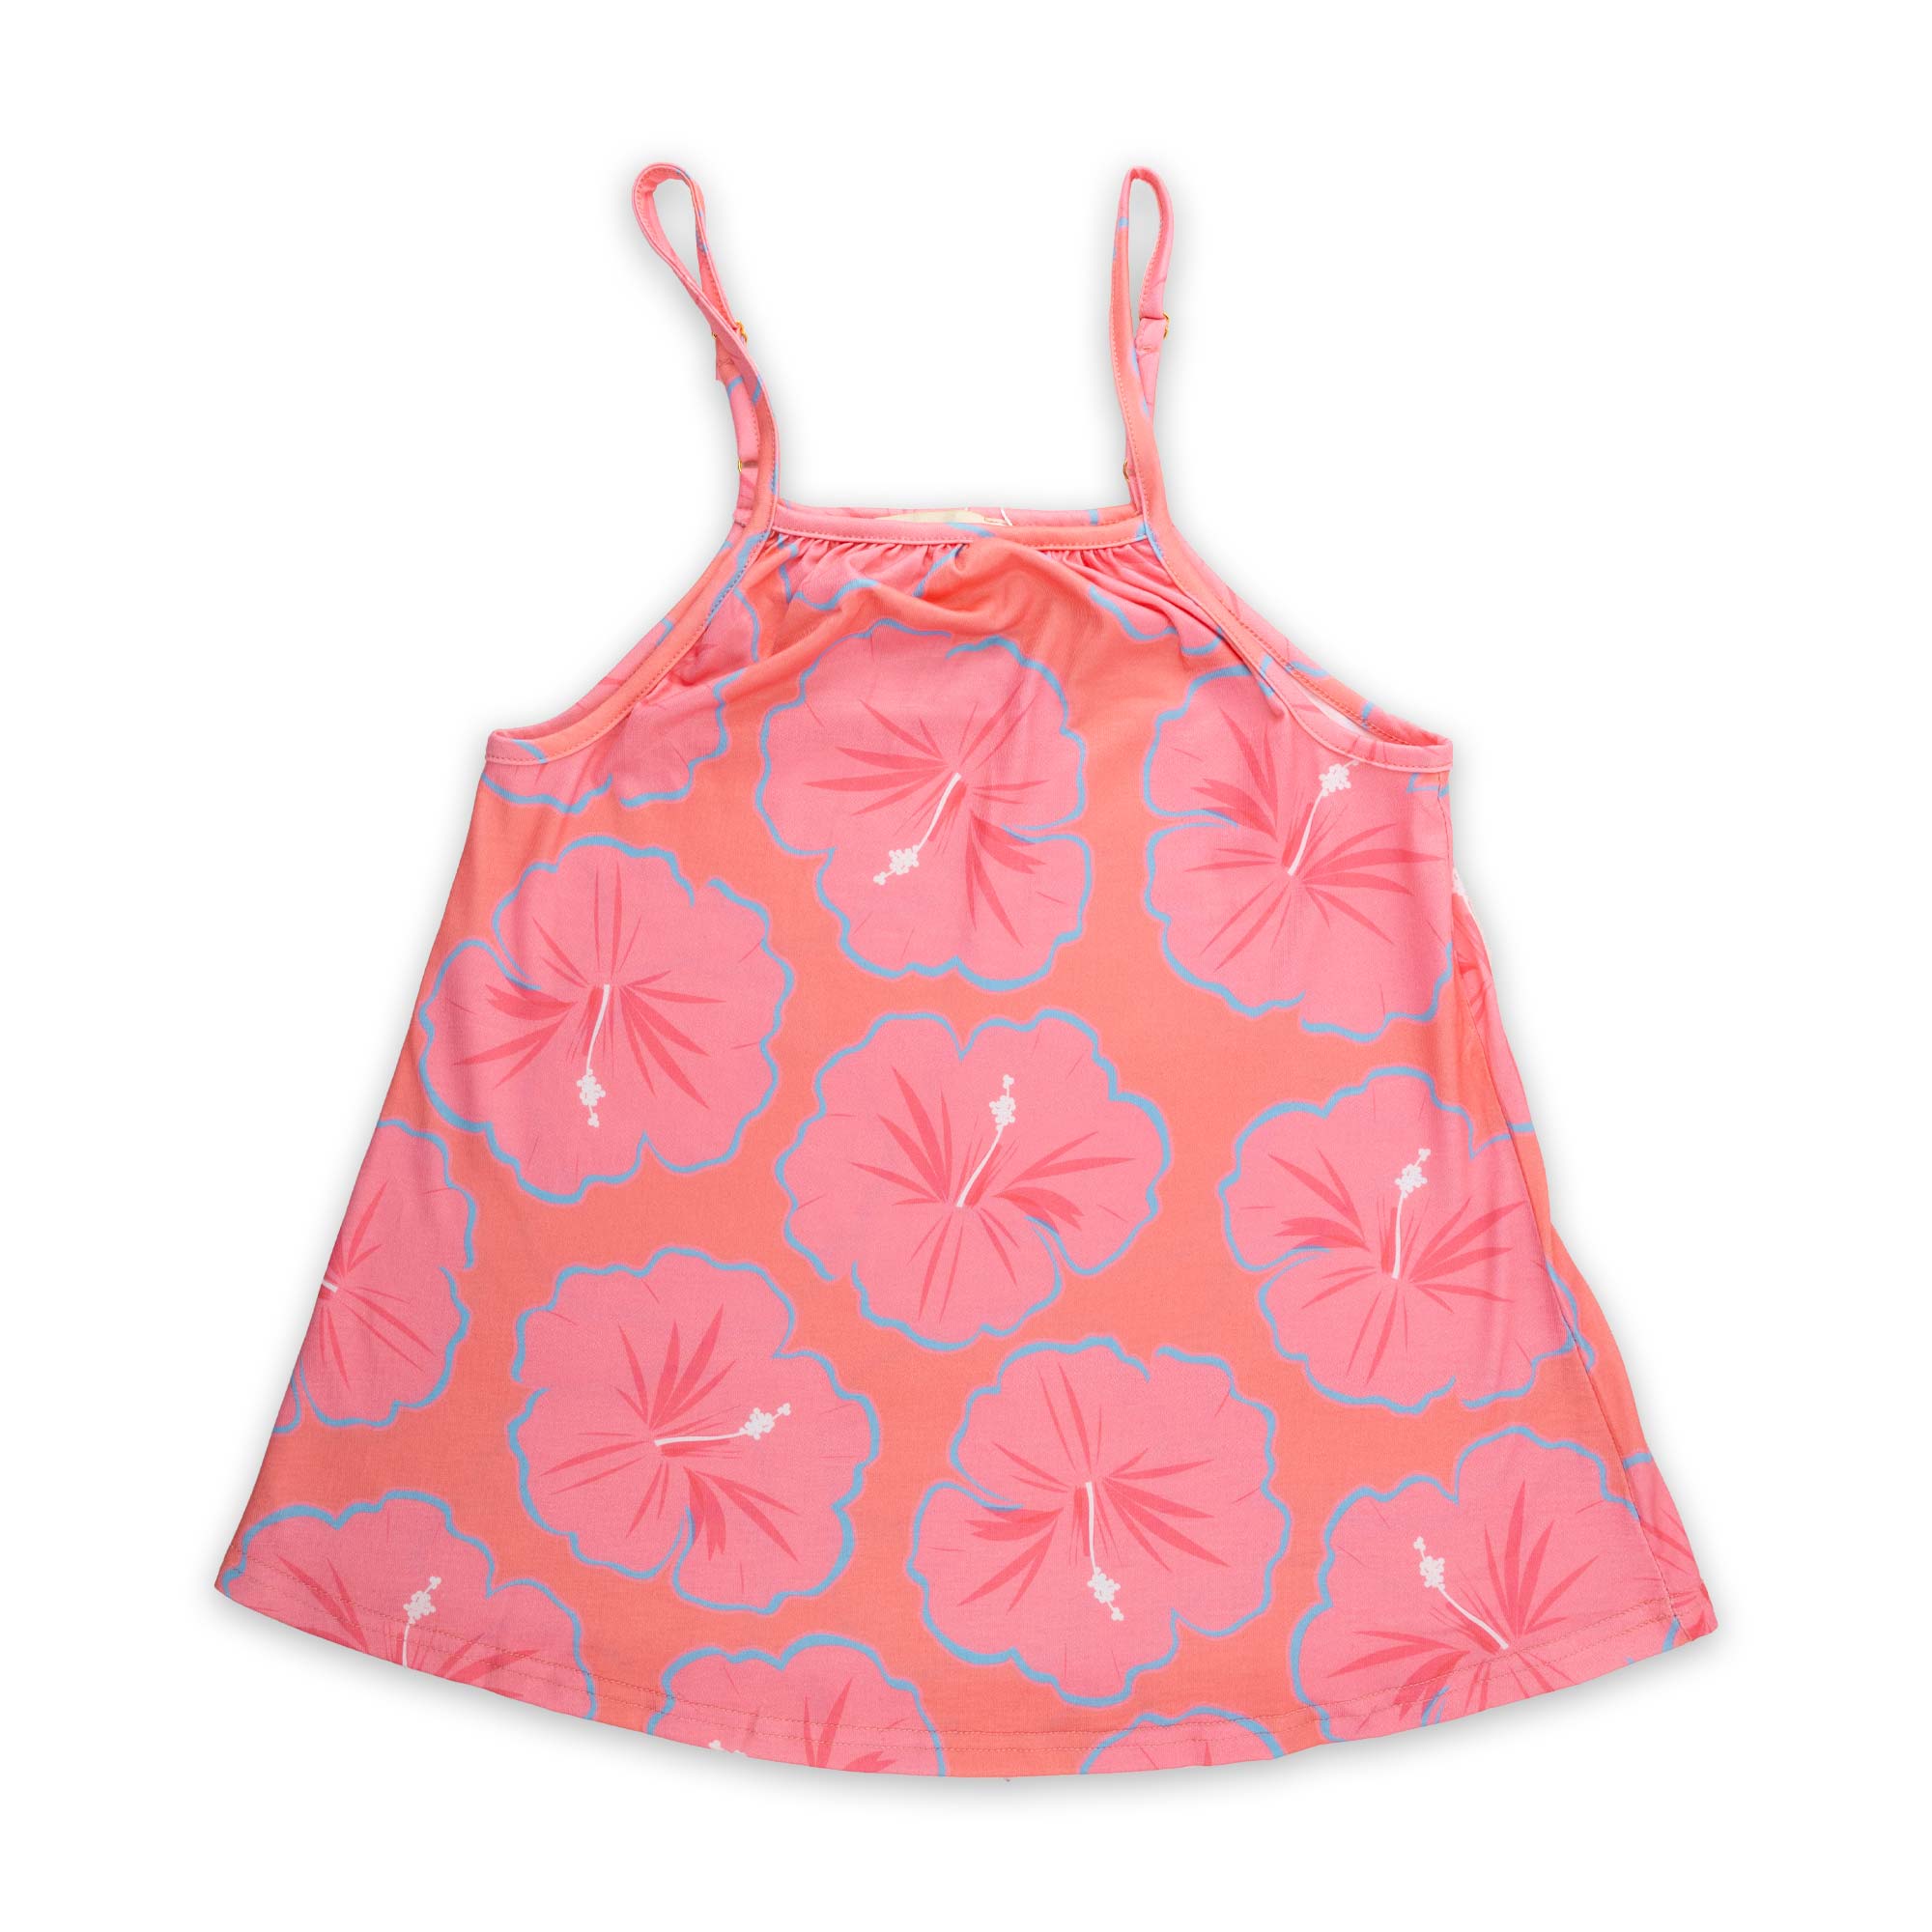 Kids Collection– The Hawaii Store